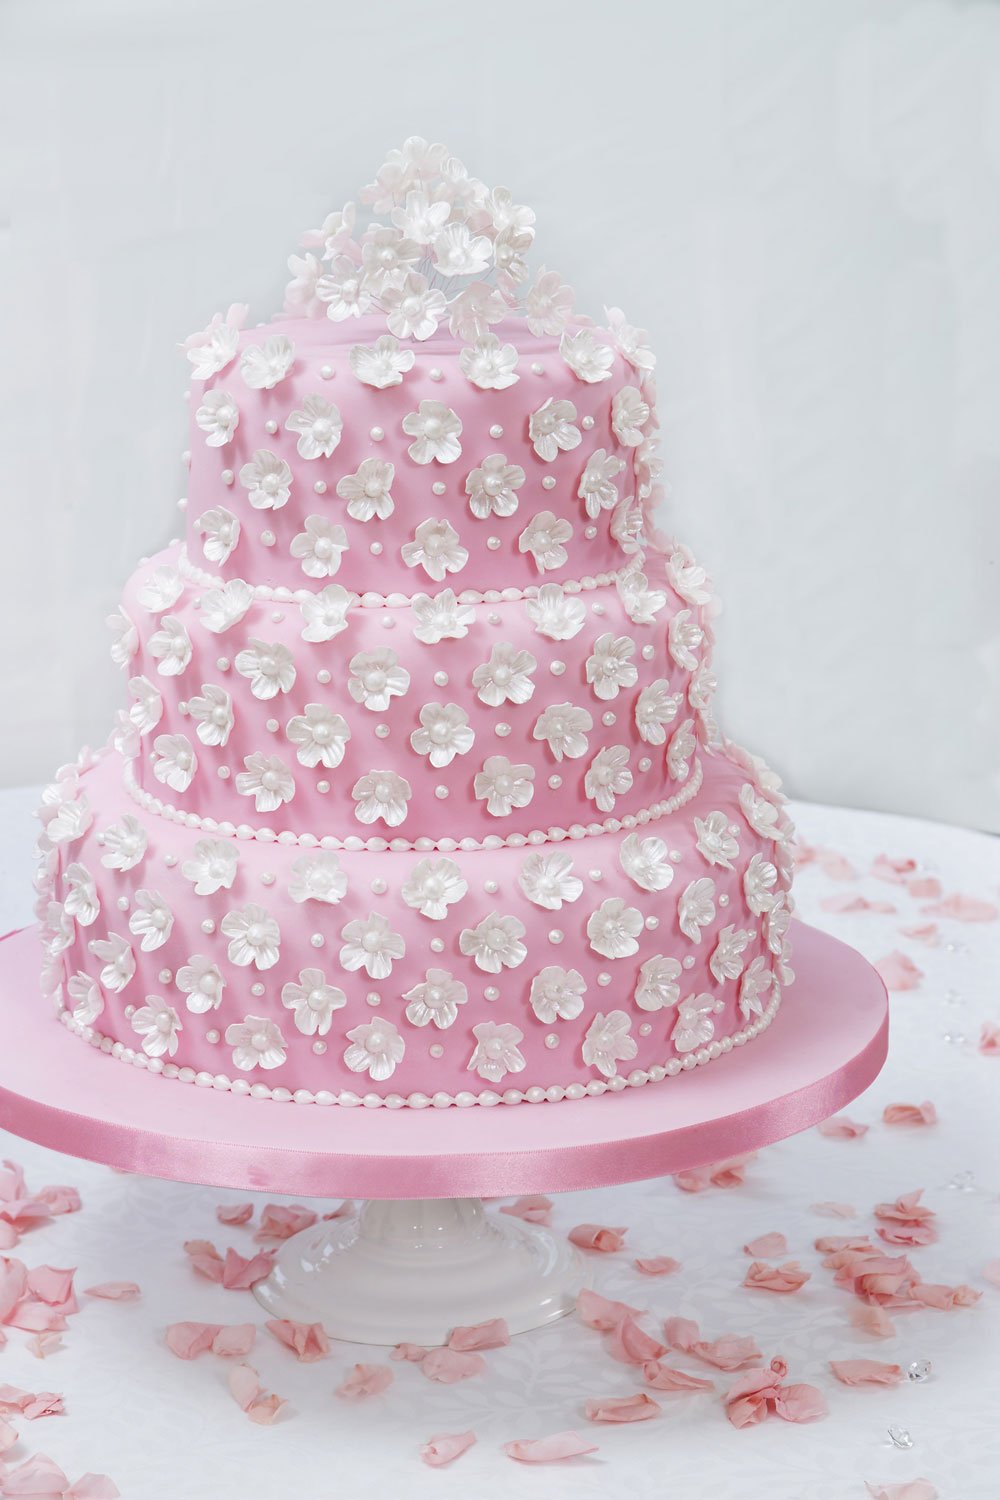 How to make and decorate a wedding cake